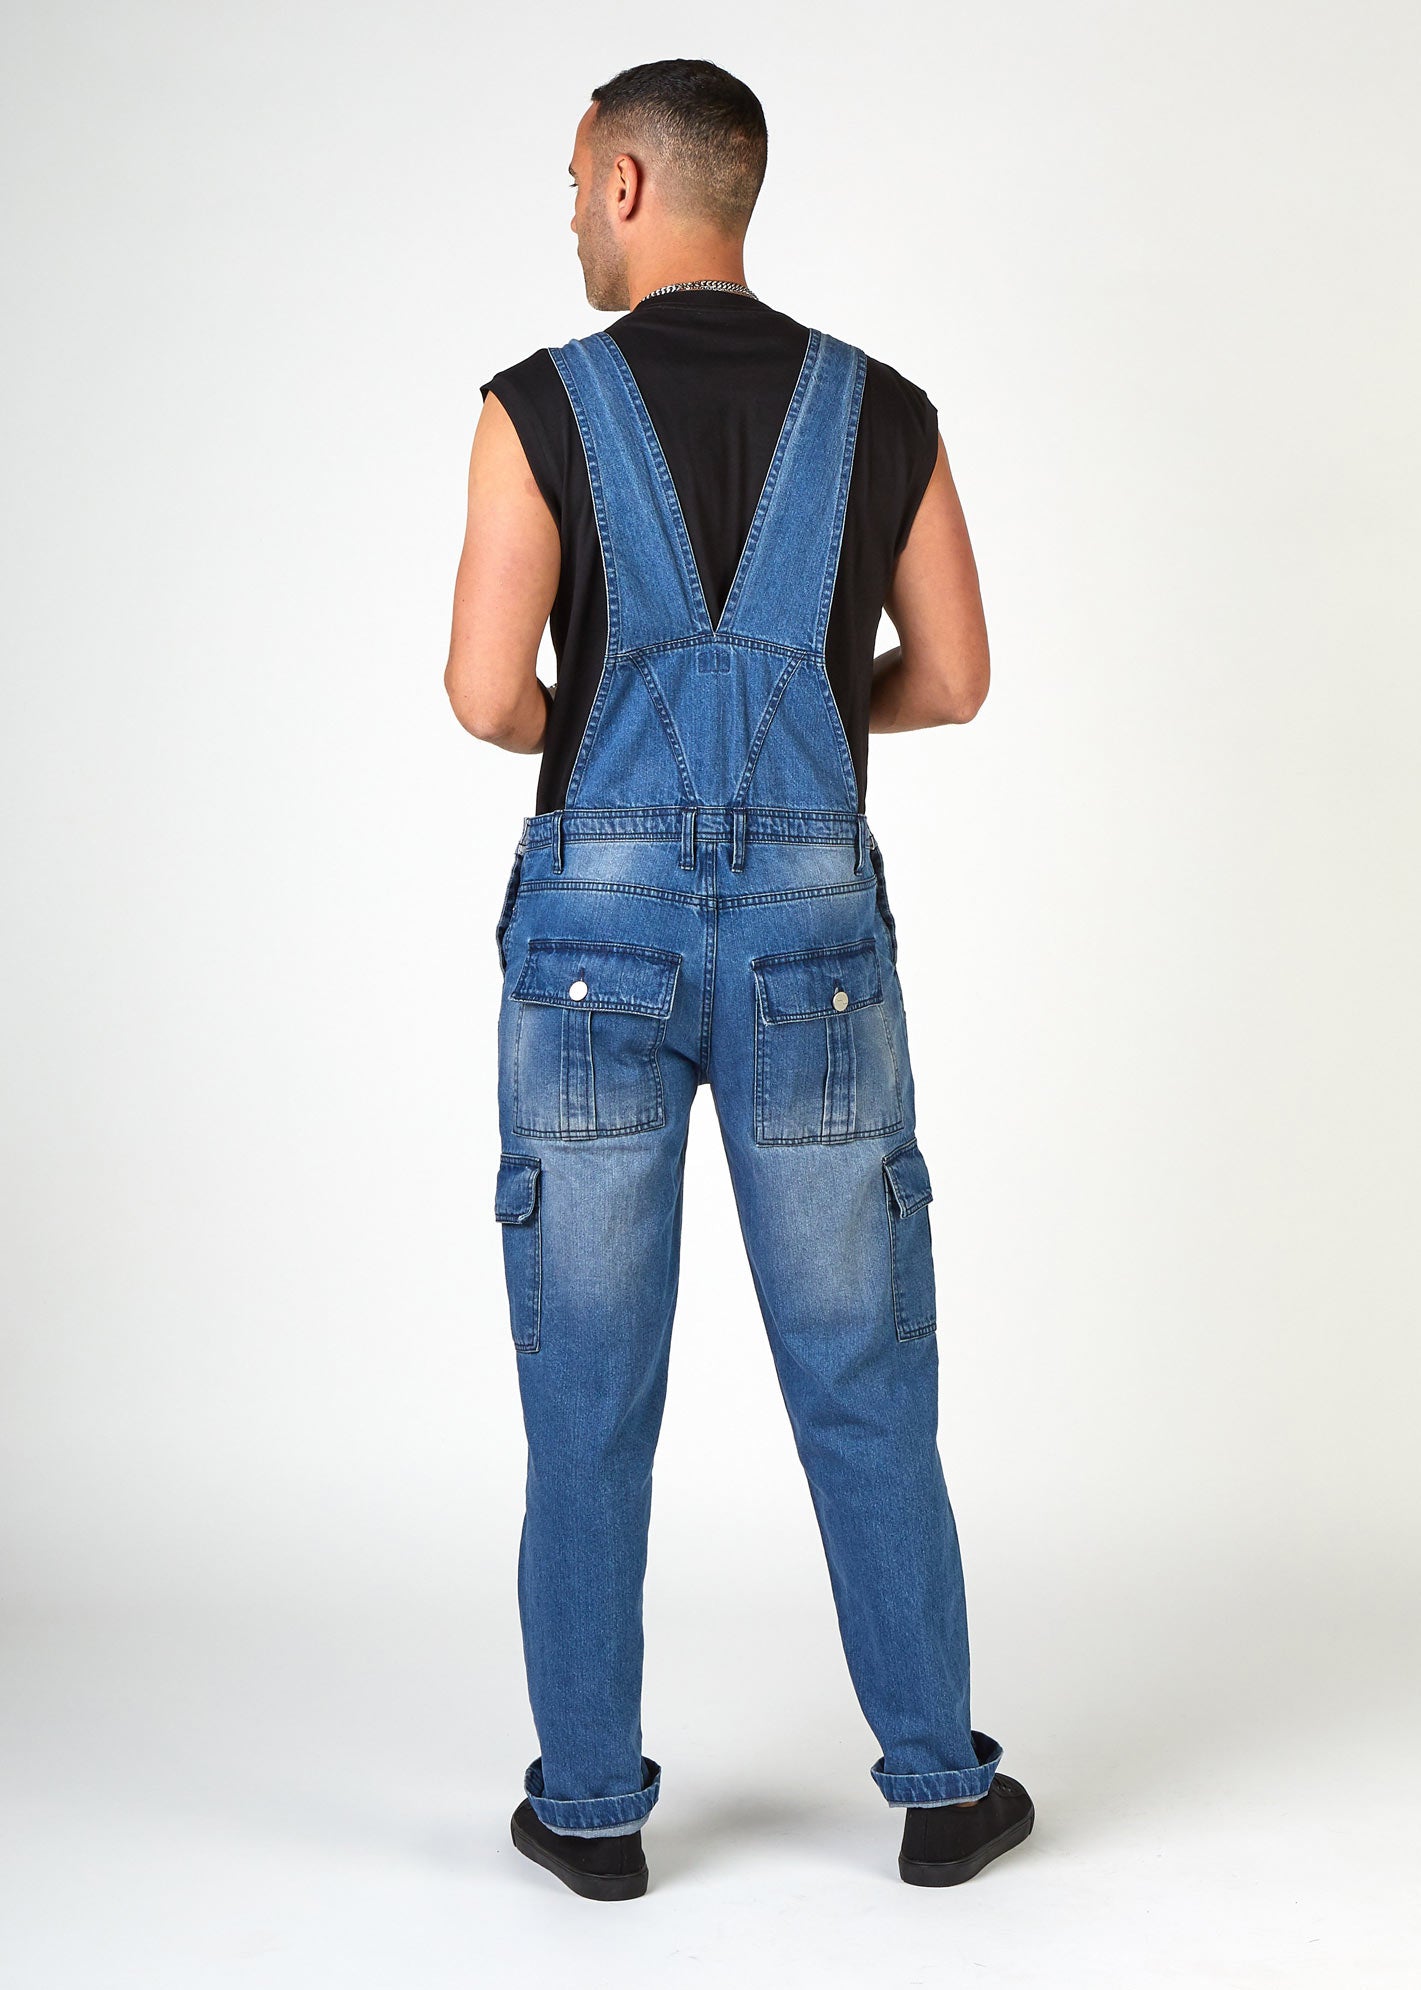 Back view of loose-fitting stonewash bib-overalls with clear view of back pockets, back strap, belt loops and denim detailing.